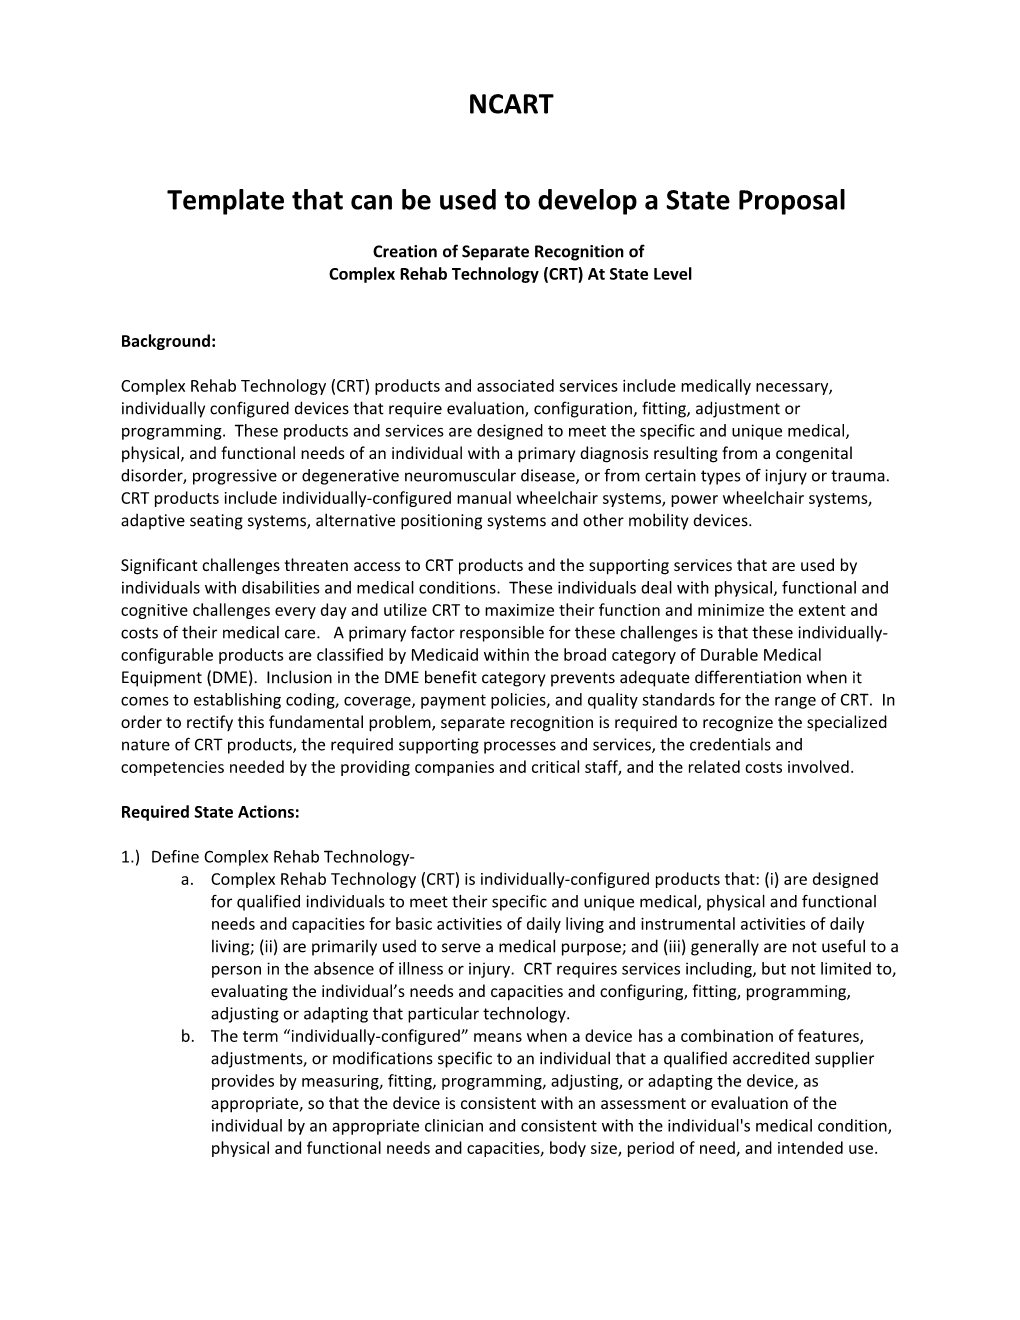 Template That Can Be Used to Develop a State Proposal